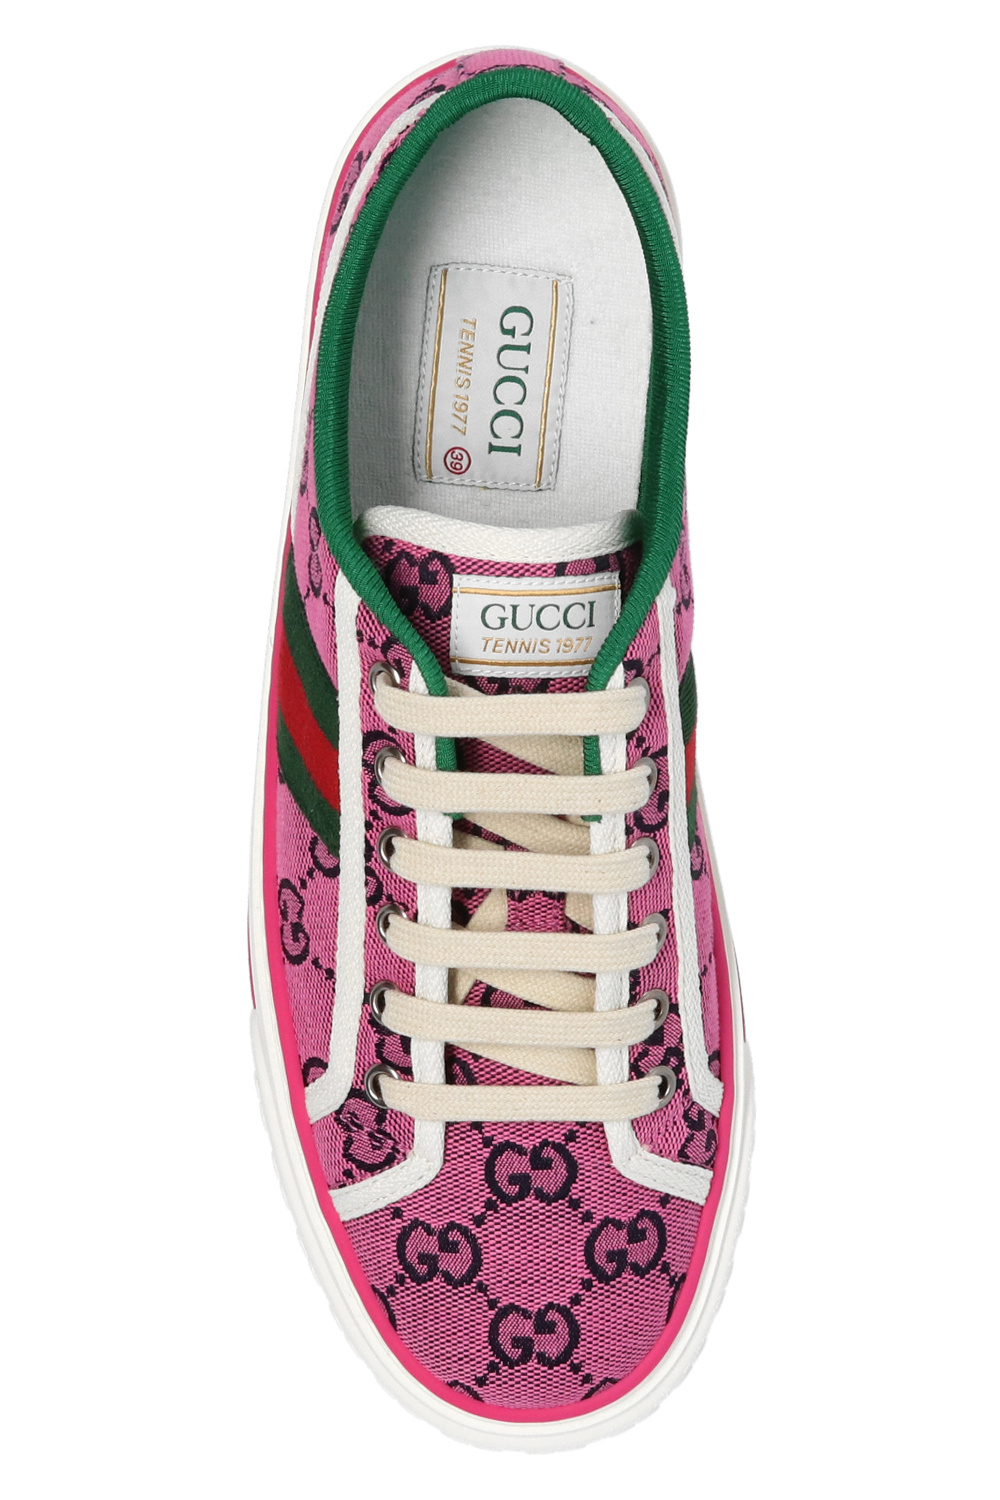 GUCCI #40287 Pink GG Canvas Sneakers (US 7.5 EU 37.5) – ALL YOUR BLISS